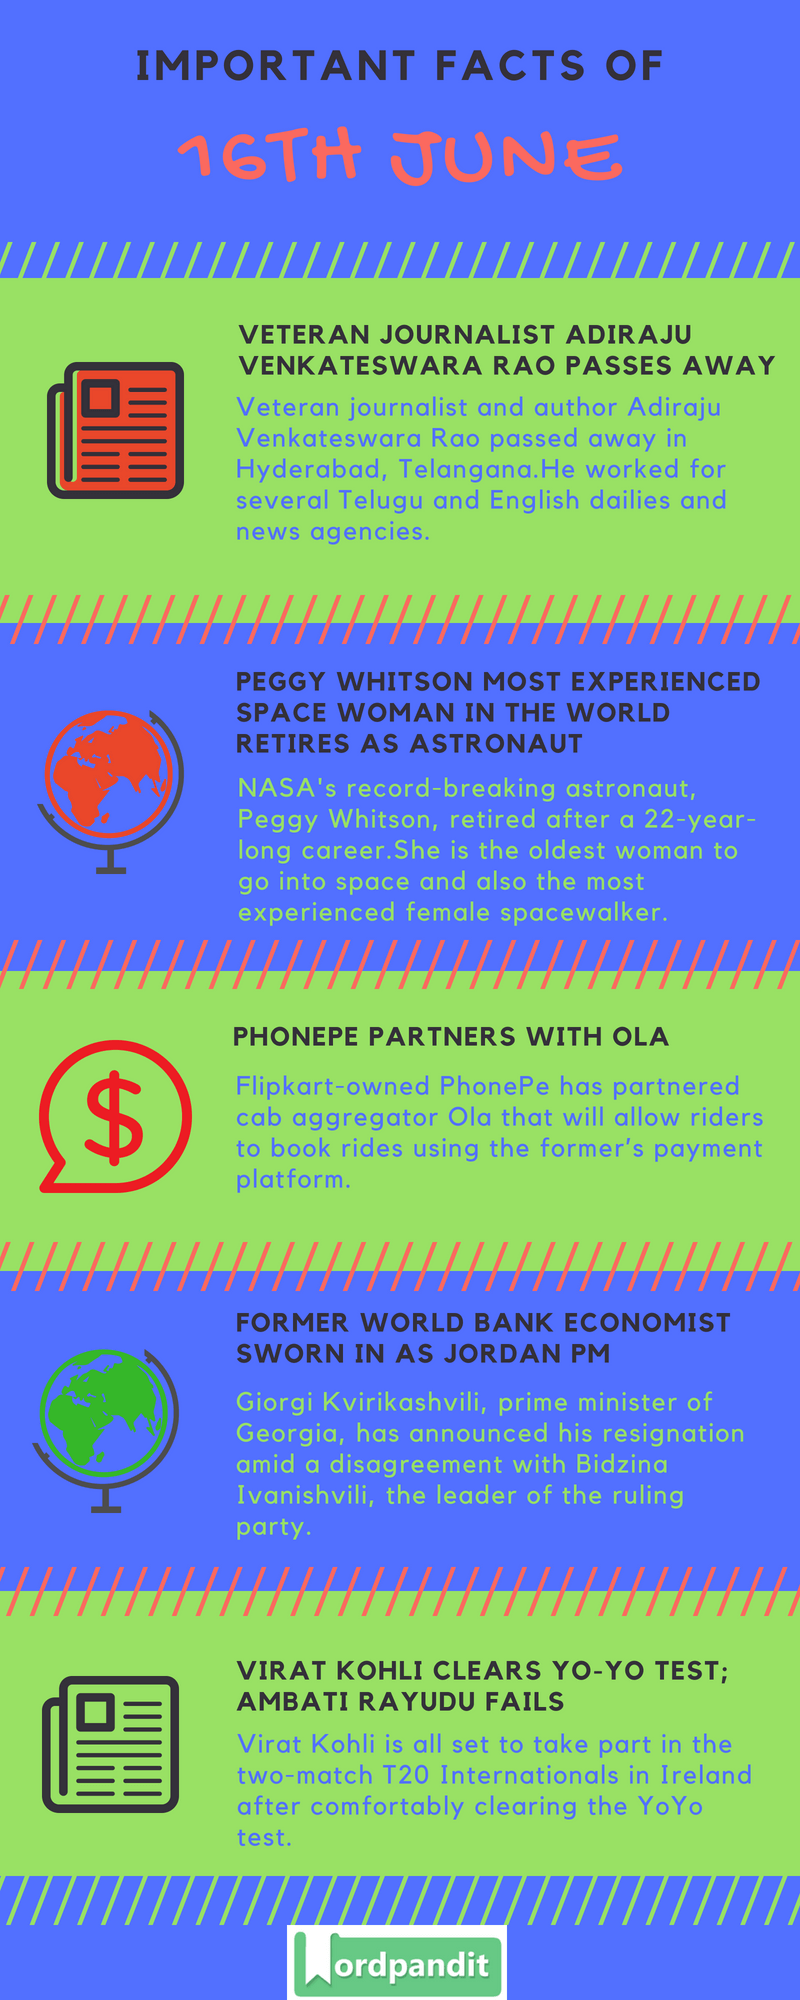 Daily Current Affairs 16 June 2018 Current Affairs Quiz June 16 2018 Current Affairs Infographic